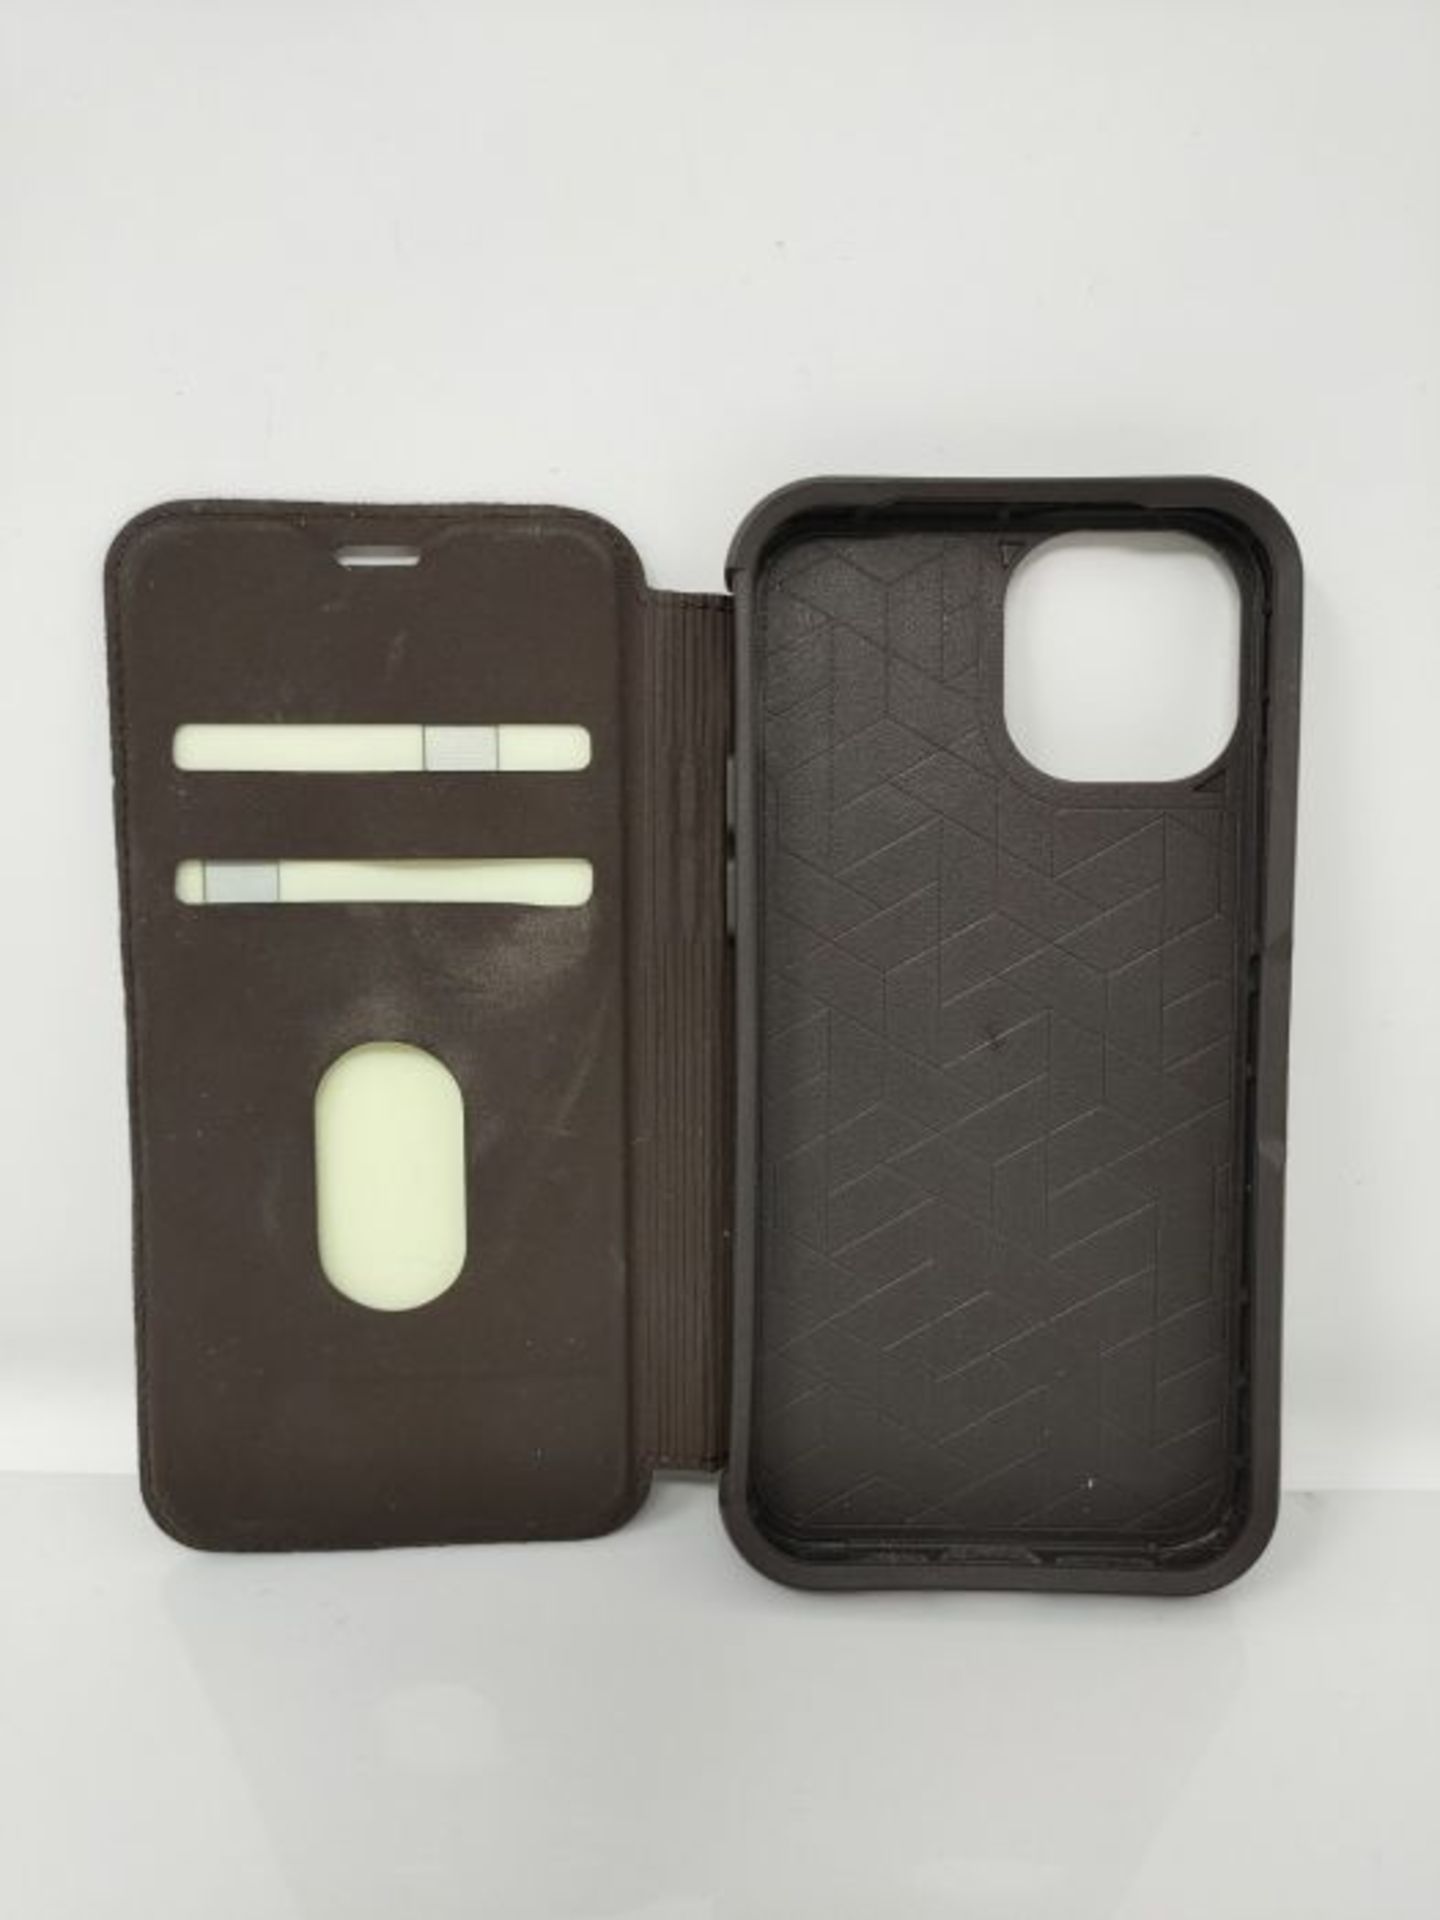 OtterBox for Apple iPhone 11, Premium Leather Protective Folio Case, Strada Series, Br - Image 3 of 3